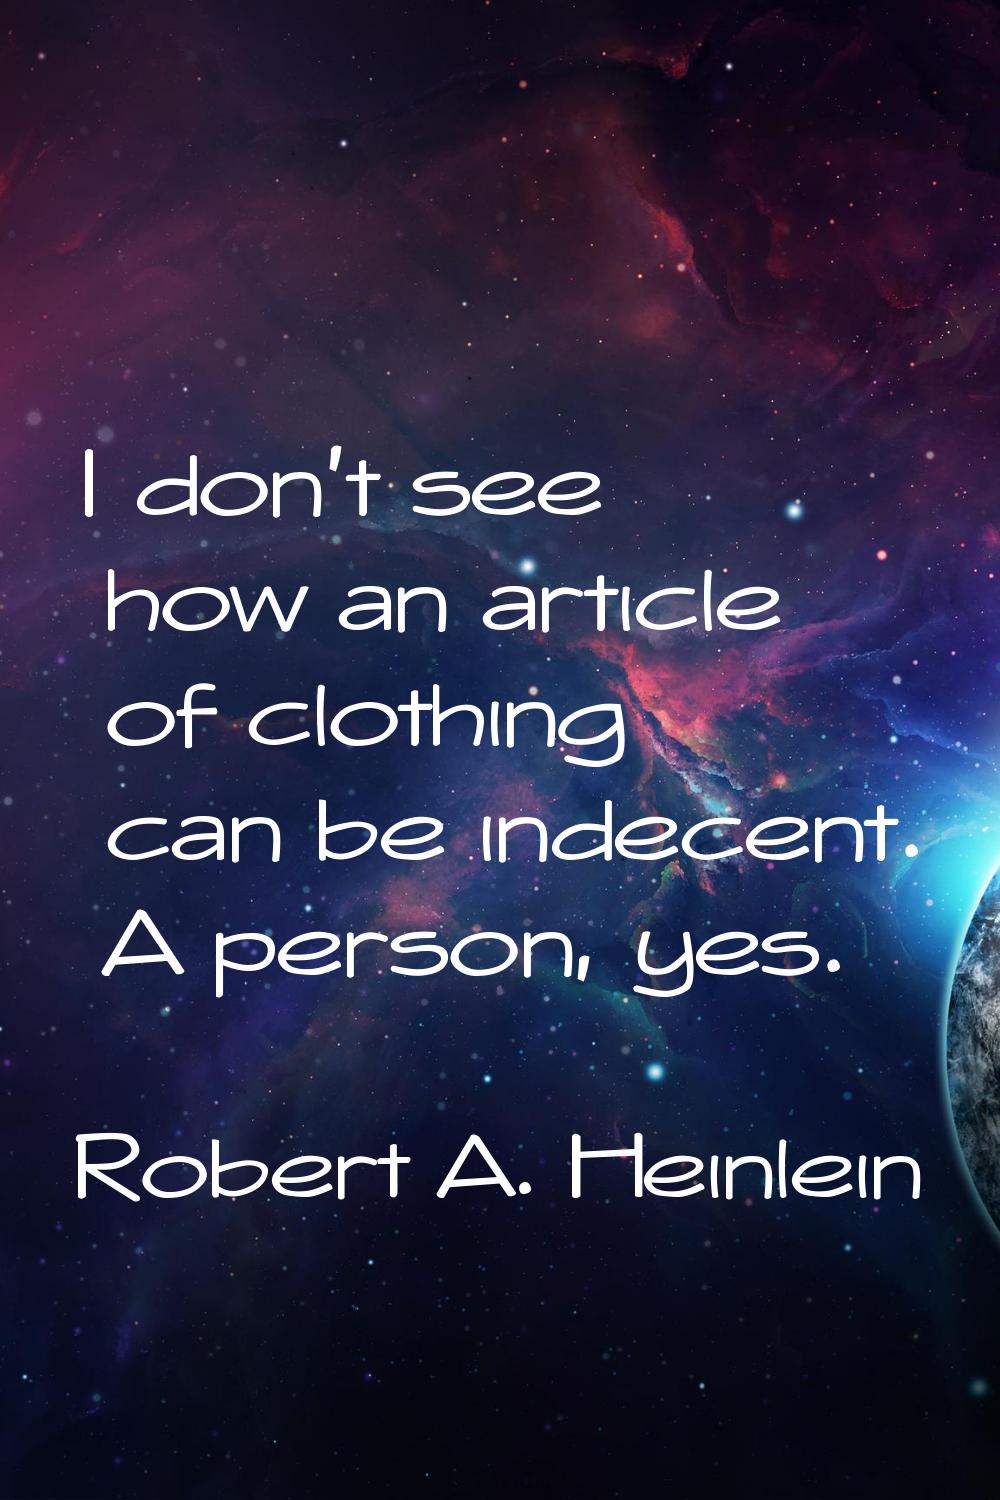 I don't see how an article of clothing can be indecent. A person, yes.